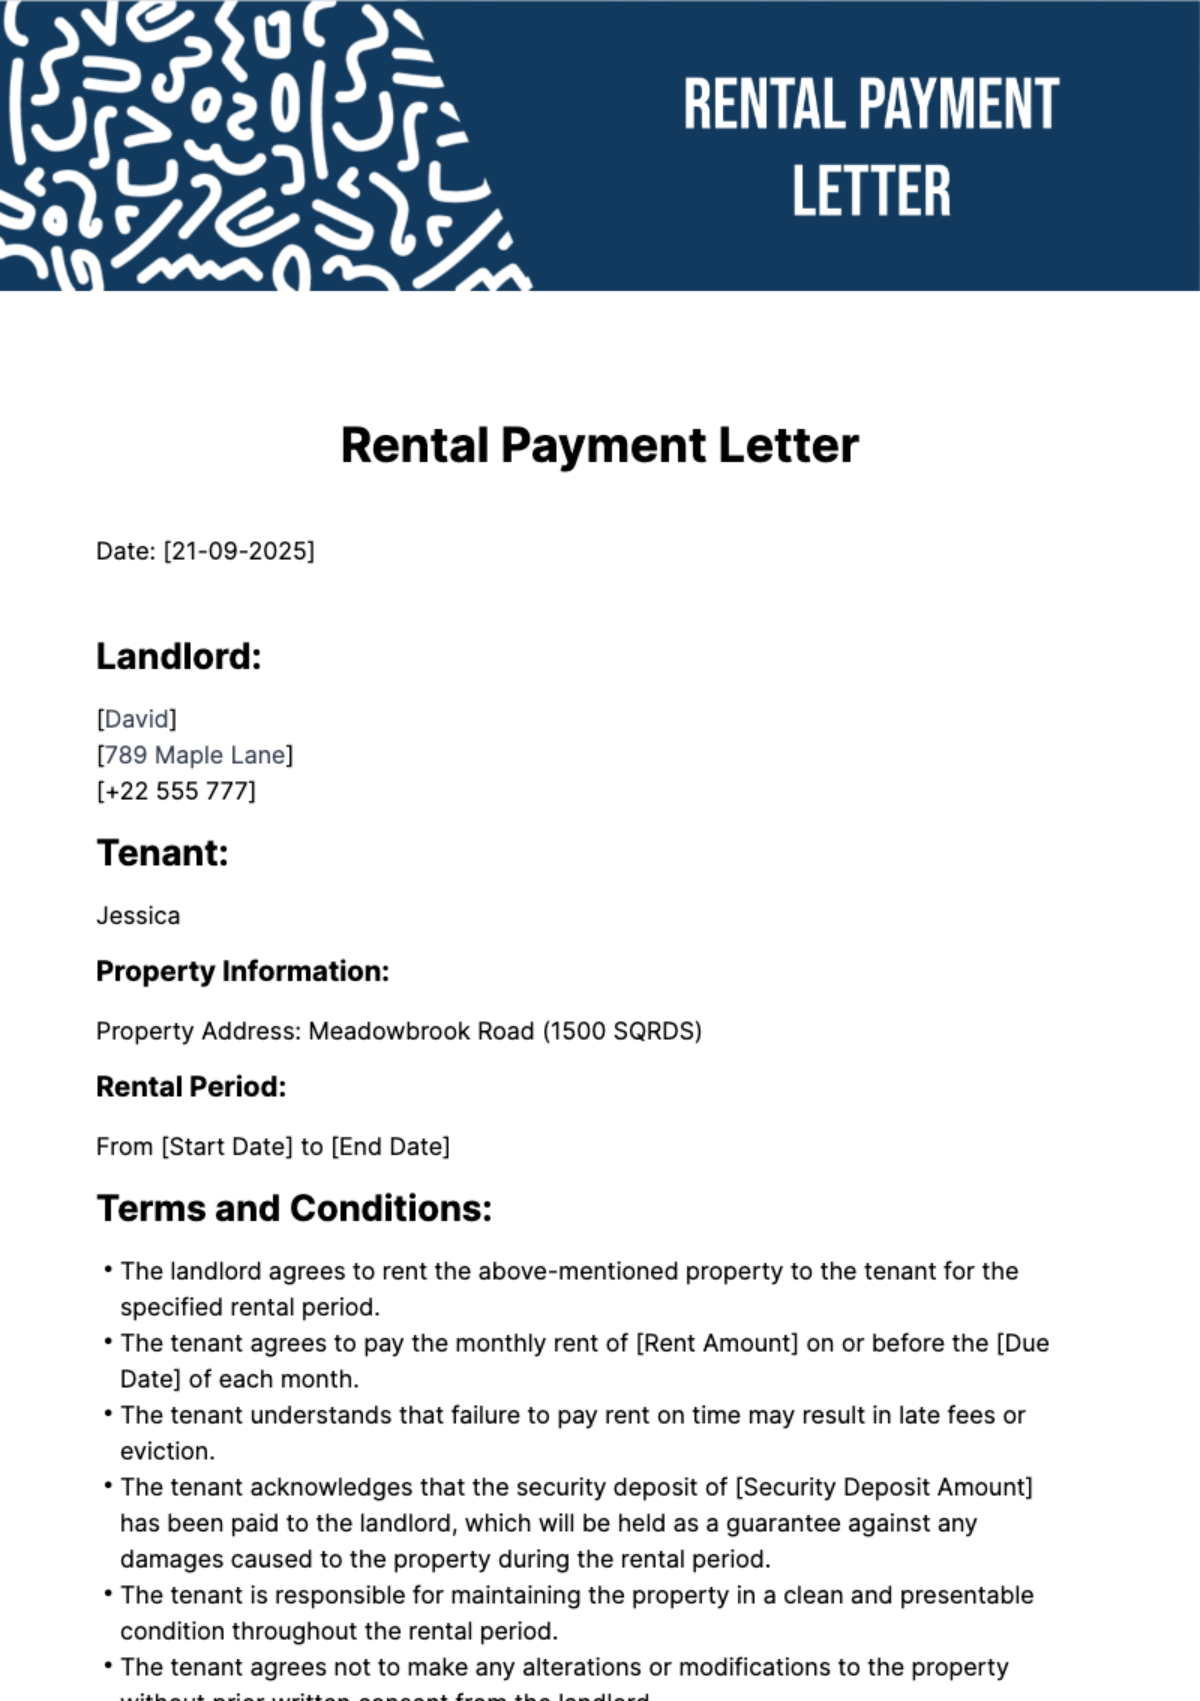 Free Rental Payment Letter Template